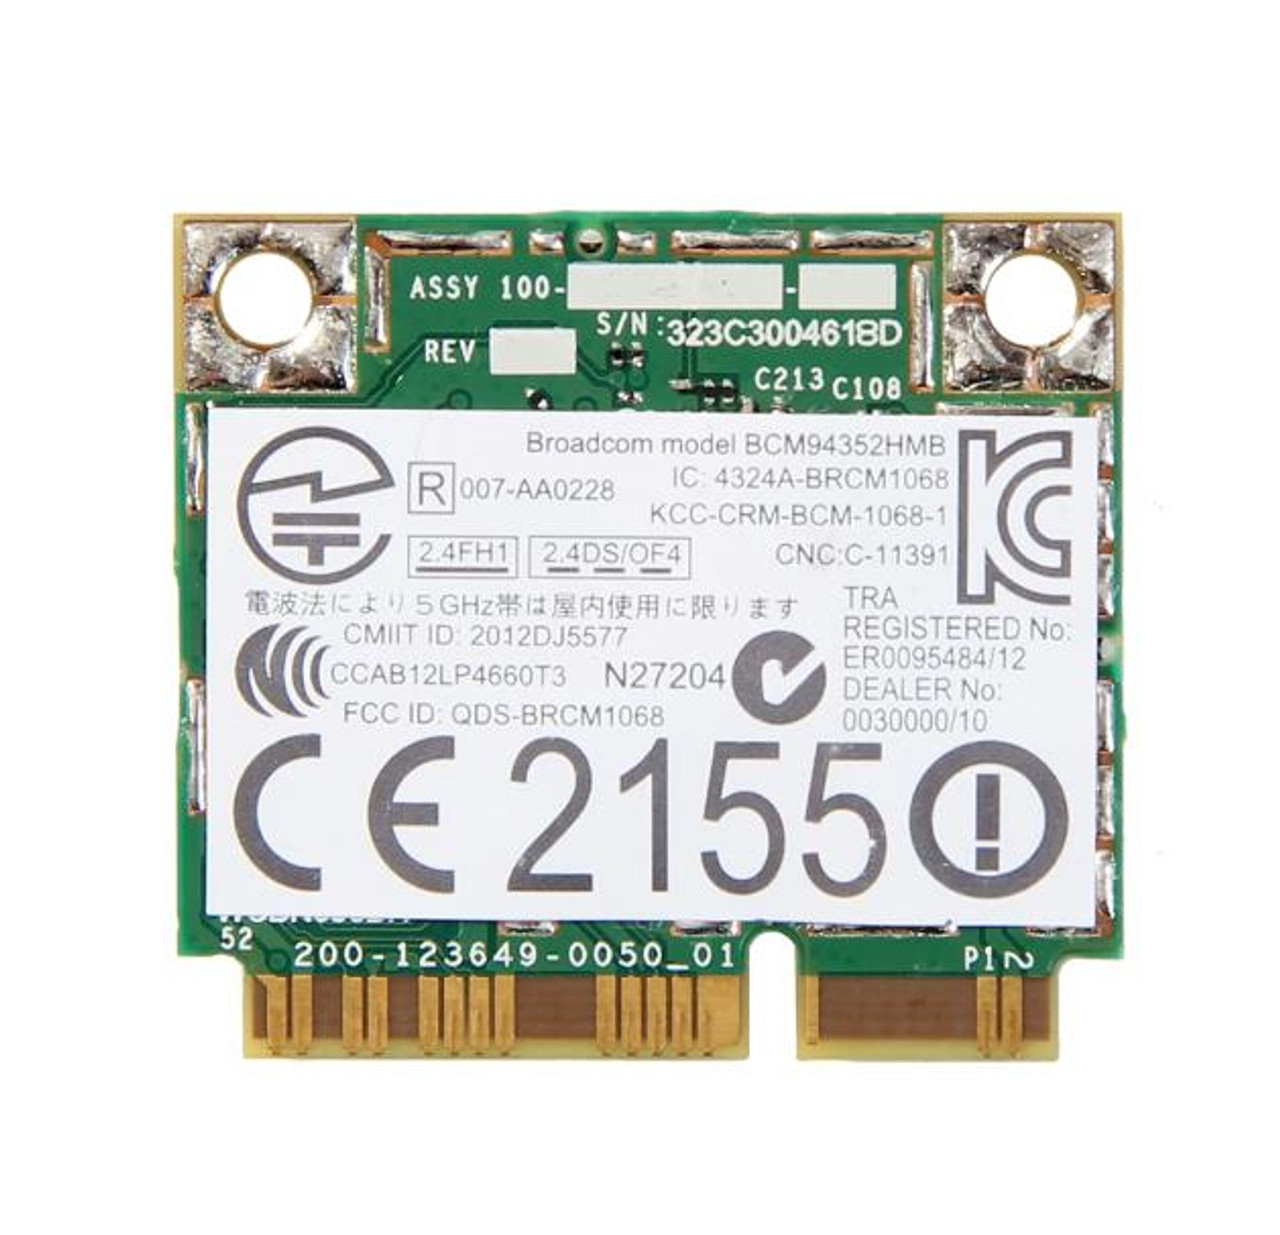 BCM94352HMB Broadcom 2.4GHz 300Mbps IEEE 802.11a/b/g Mini PCI WLAN Wireless Network Card for HP Compatible